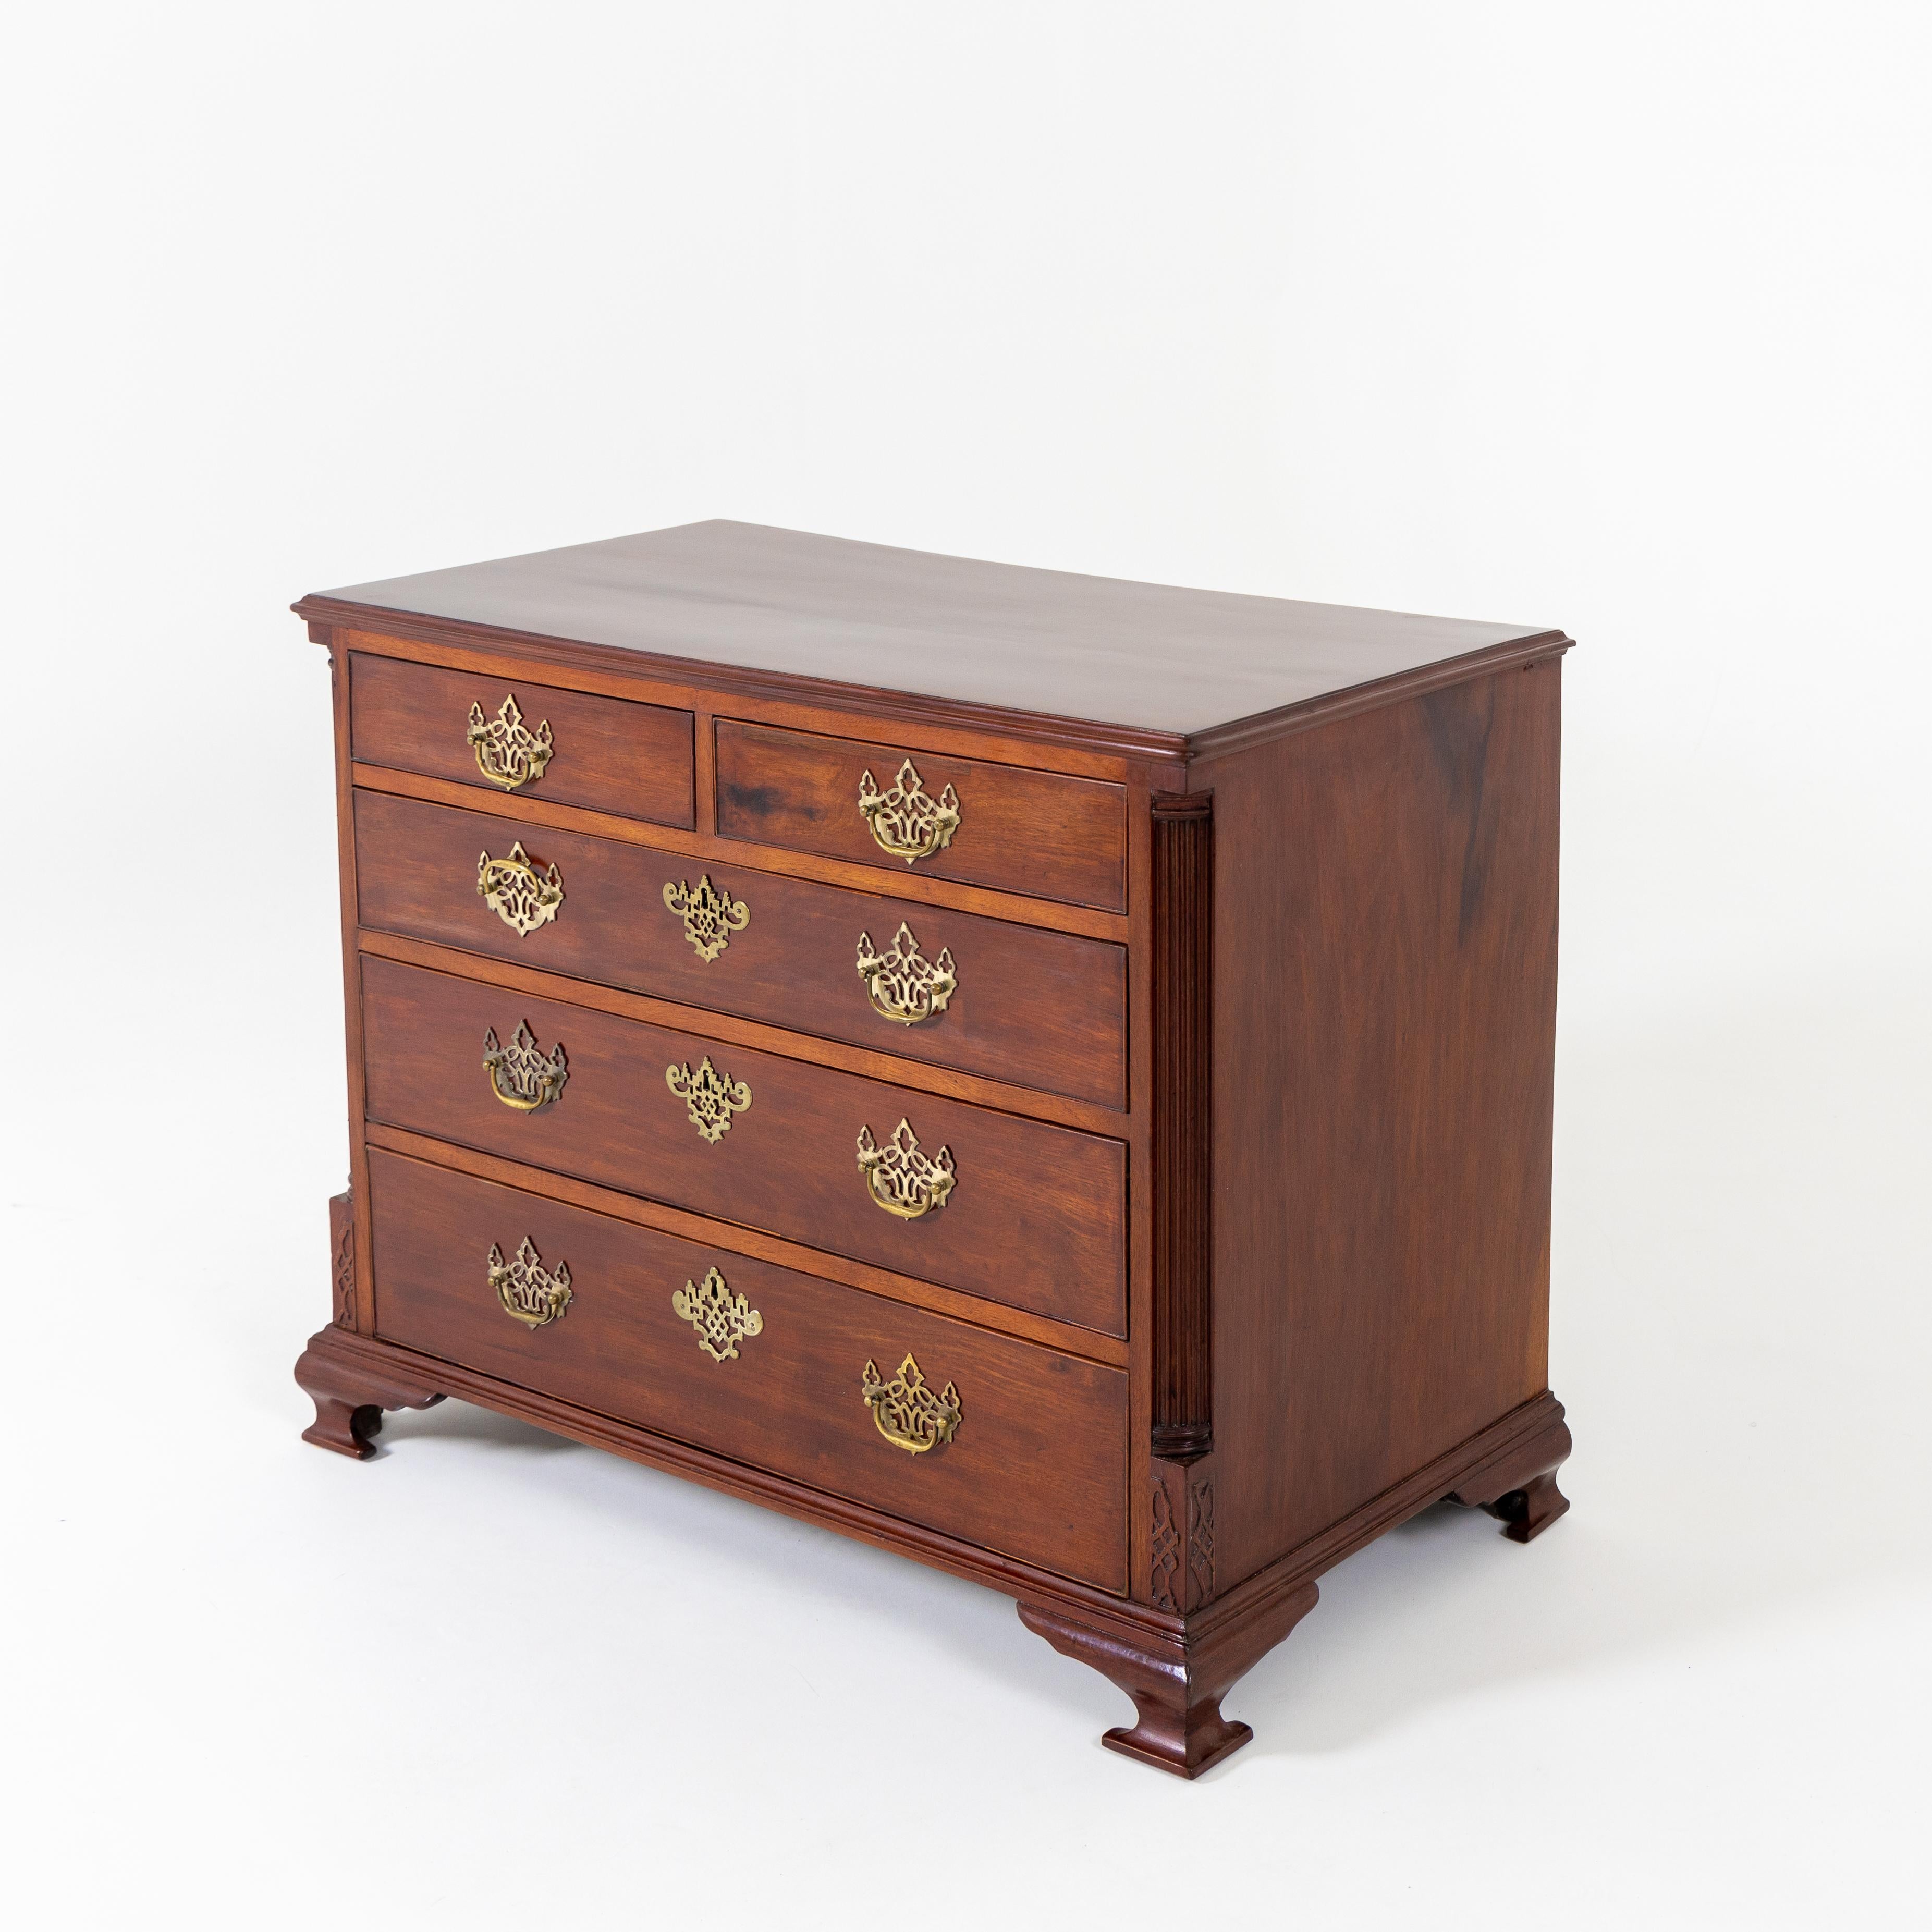 Chippendale chest of drawers in mahogany, standing on flared architrave feet. The rectilinear corpus is provided with three full-length drawers and two smaller ones. The corners are accented by fluted quarter columns and banding in relief. The